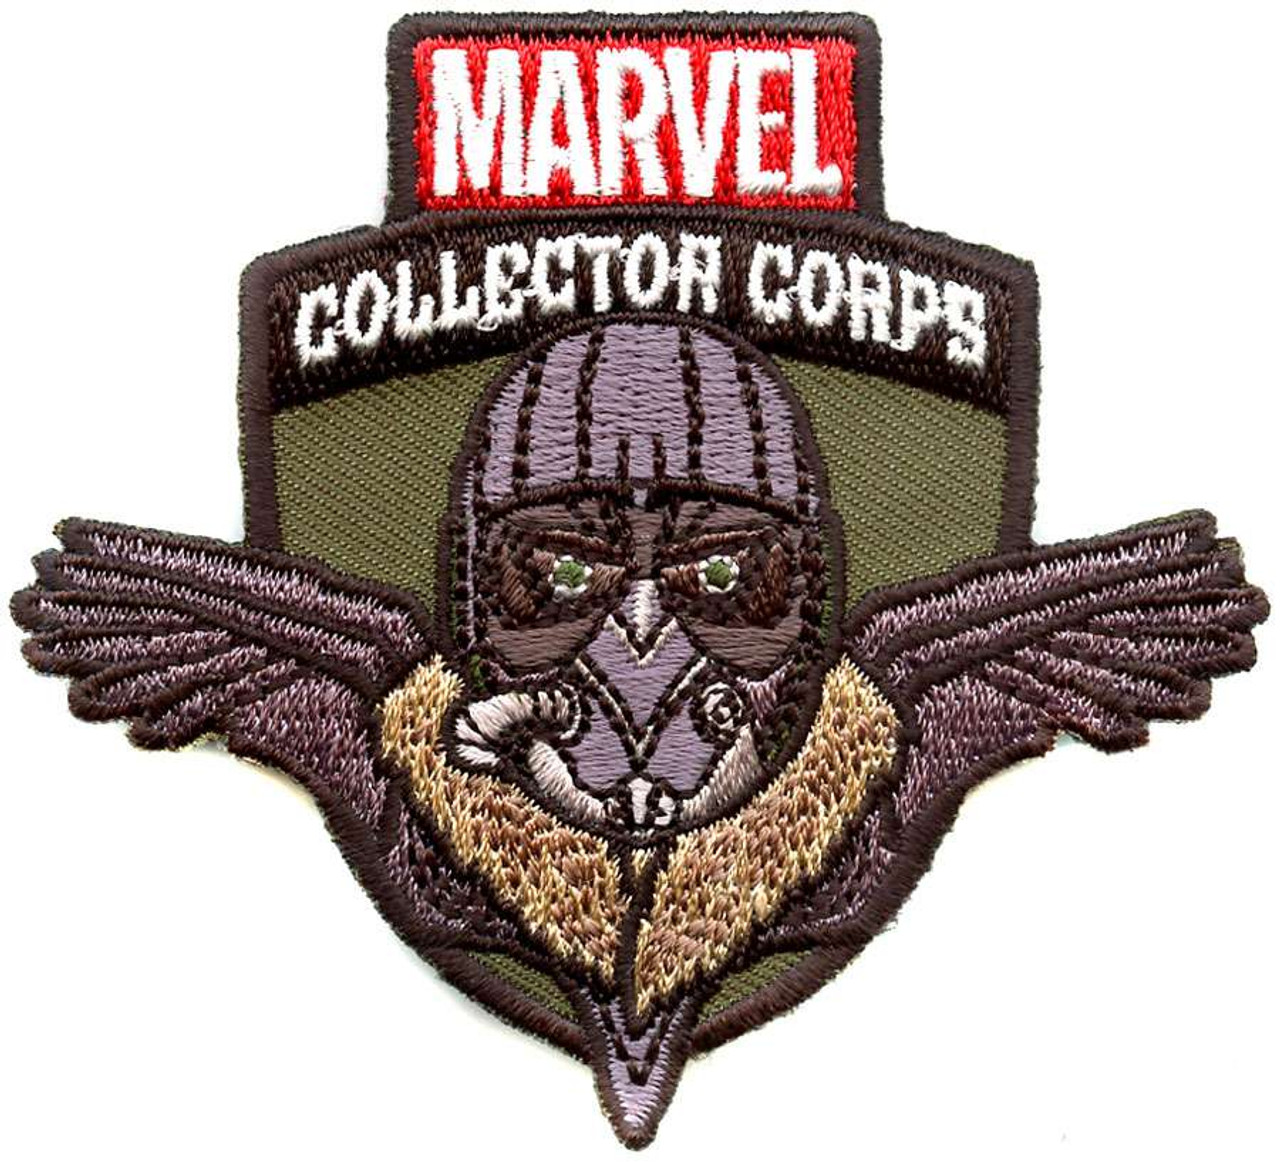 Funko Marvel Marvel Collector Corps Vulture Exclusive Patch Toywiz - hotfix elemental power simulator roblox